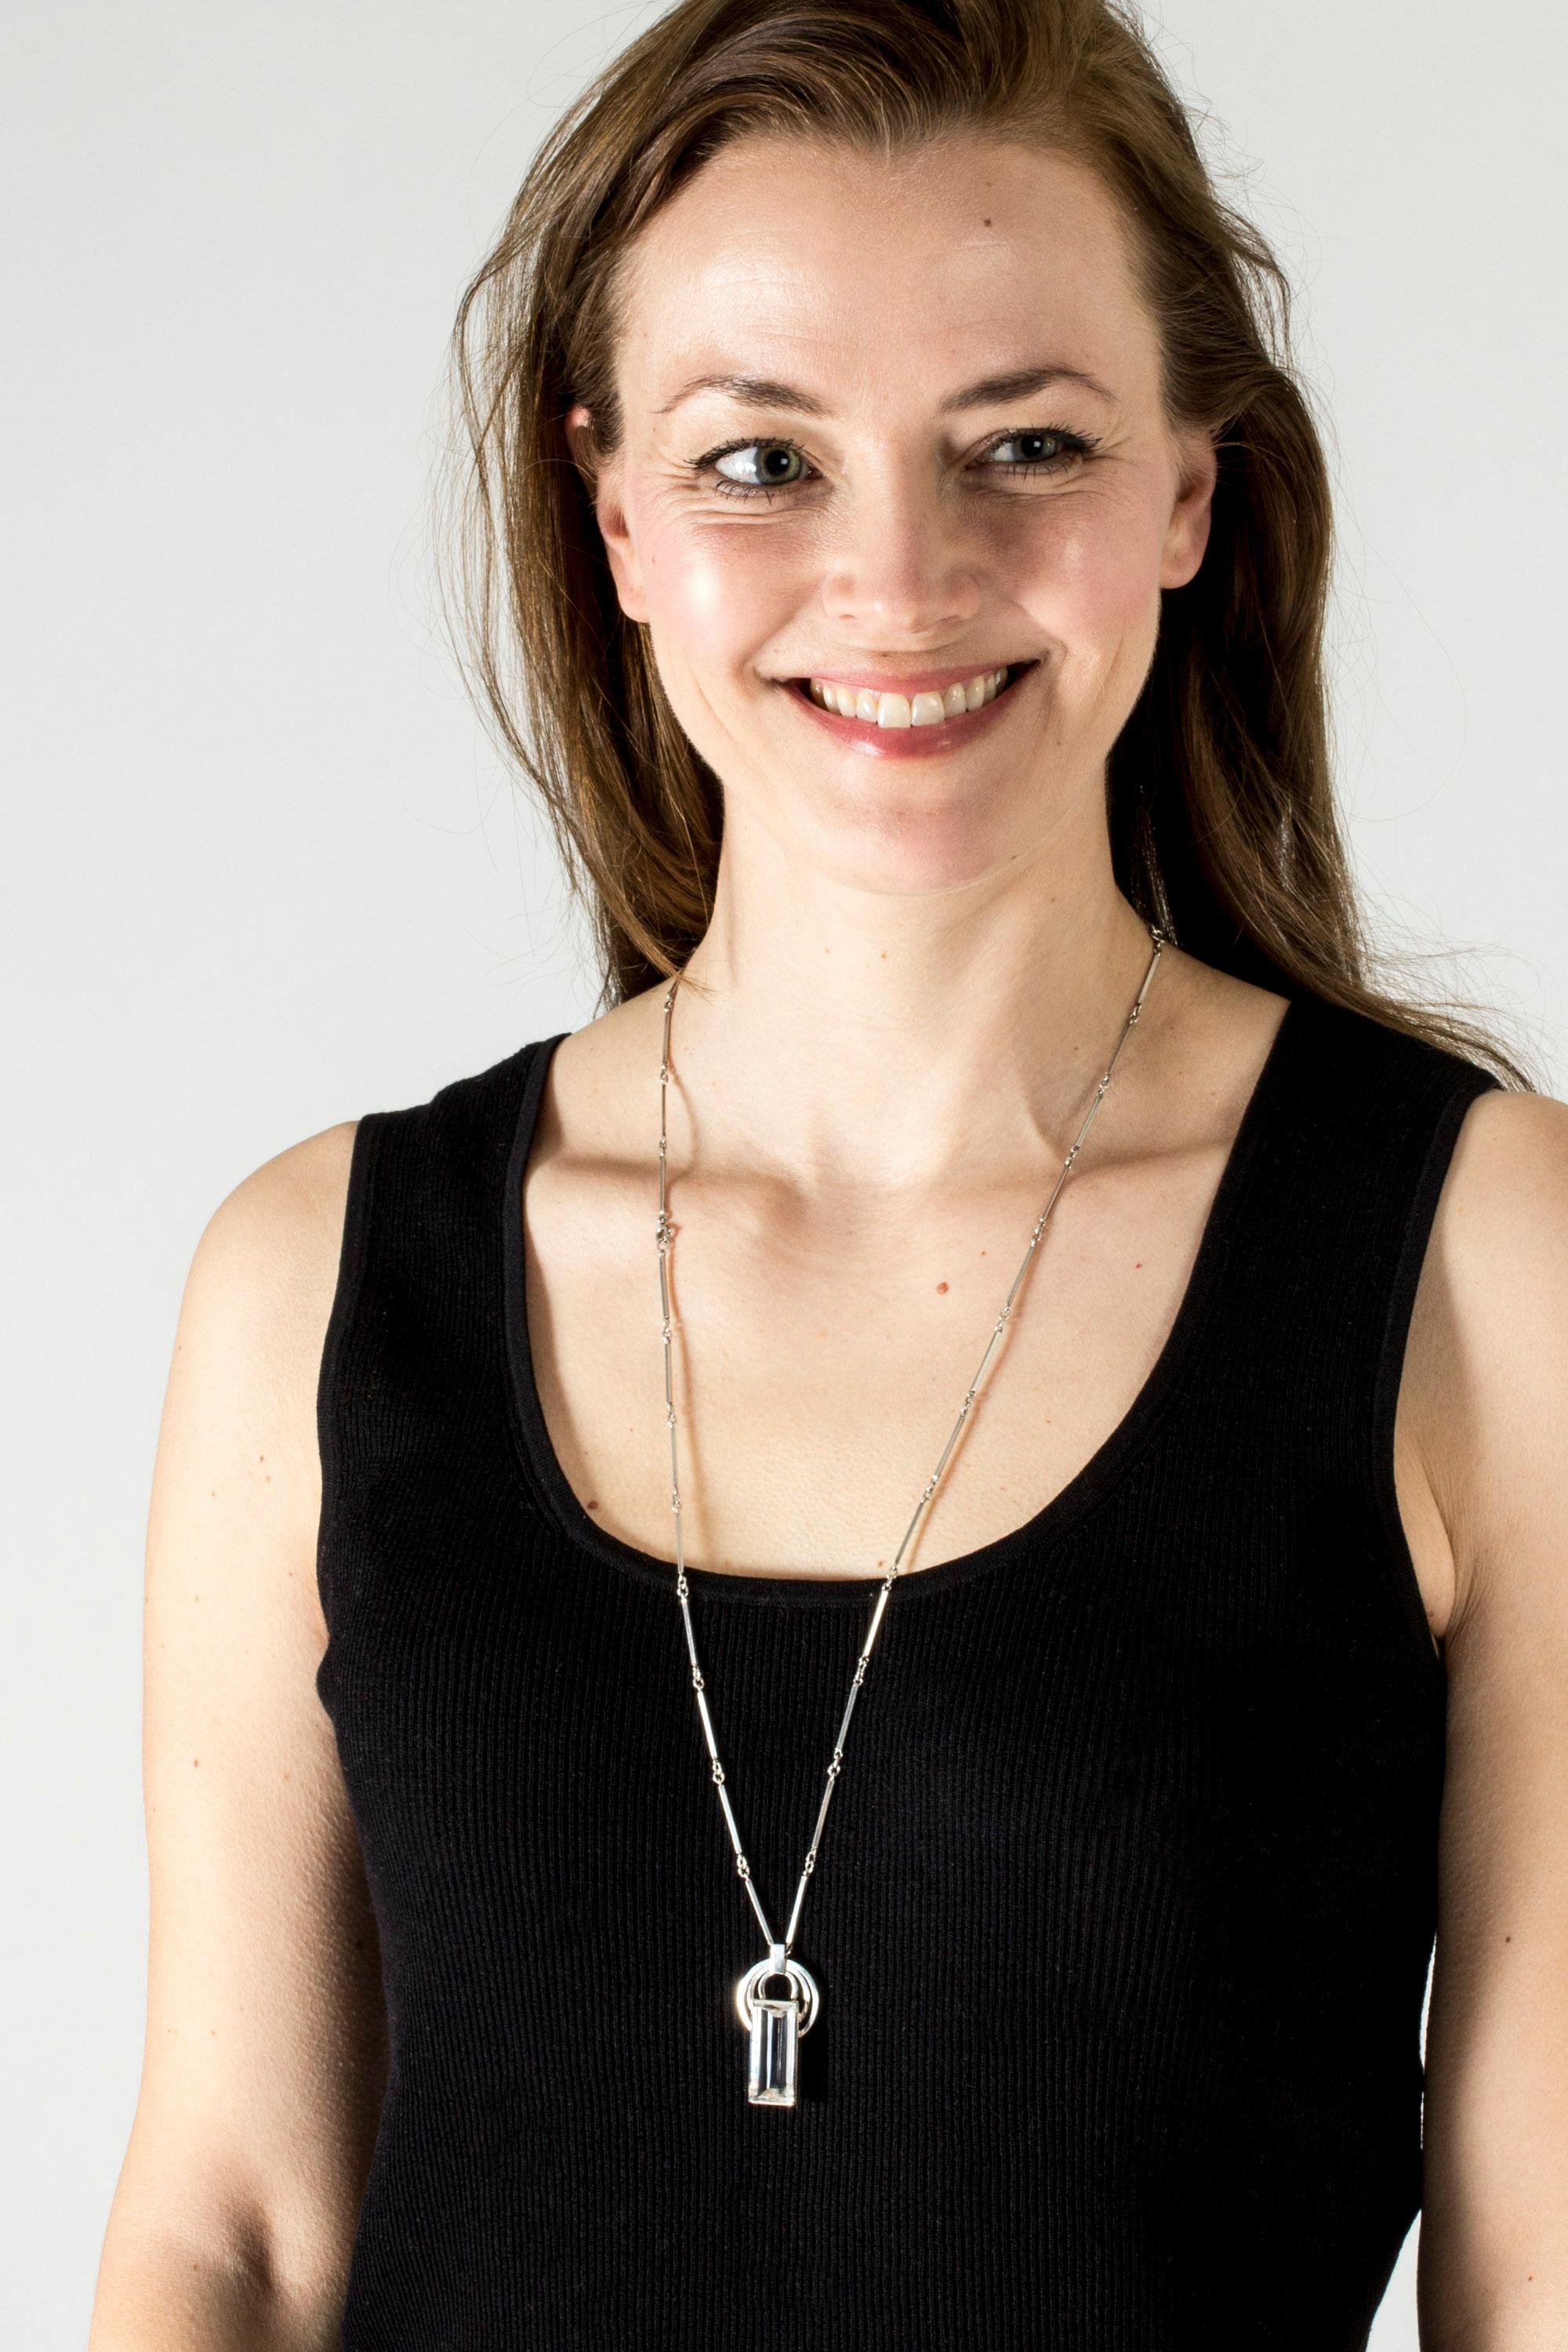 Beautiful silver necklace from Stigbert, with an elegant staff chain and rock crystal pendant. Crisp, clear stone in a baguette cut, adorned with spheres at the top. Timeless design.